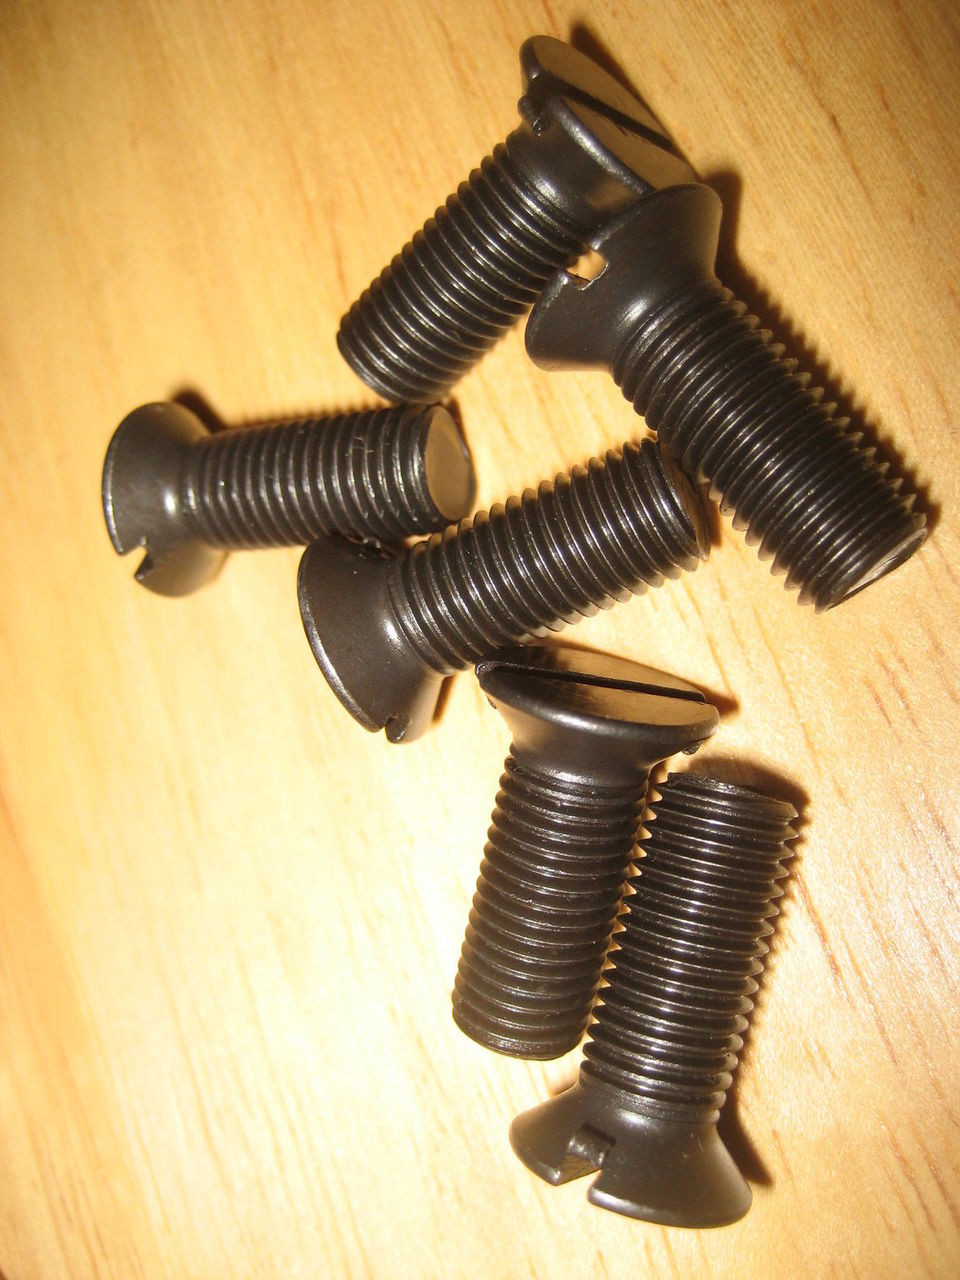 6 SLOTTED CLUTCH SCREWS - 21210070155